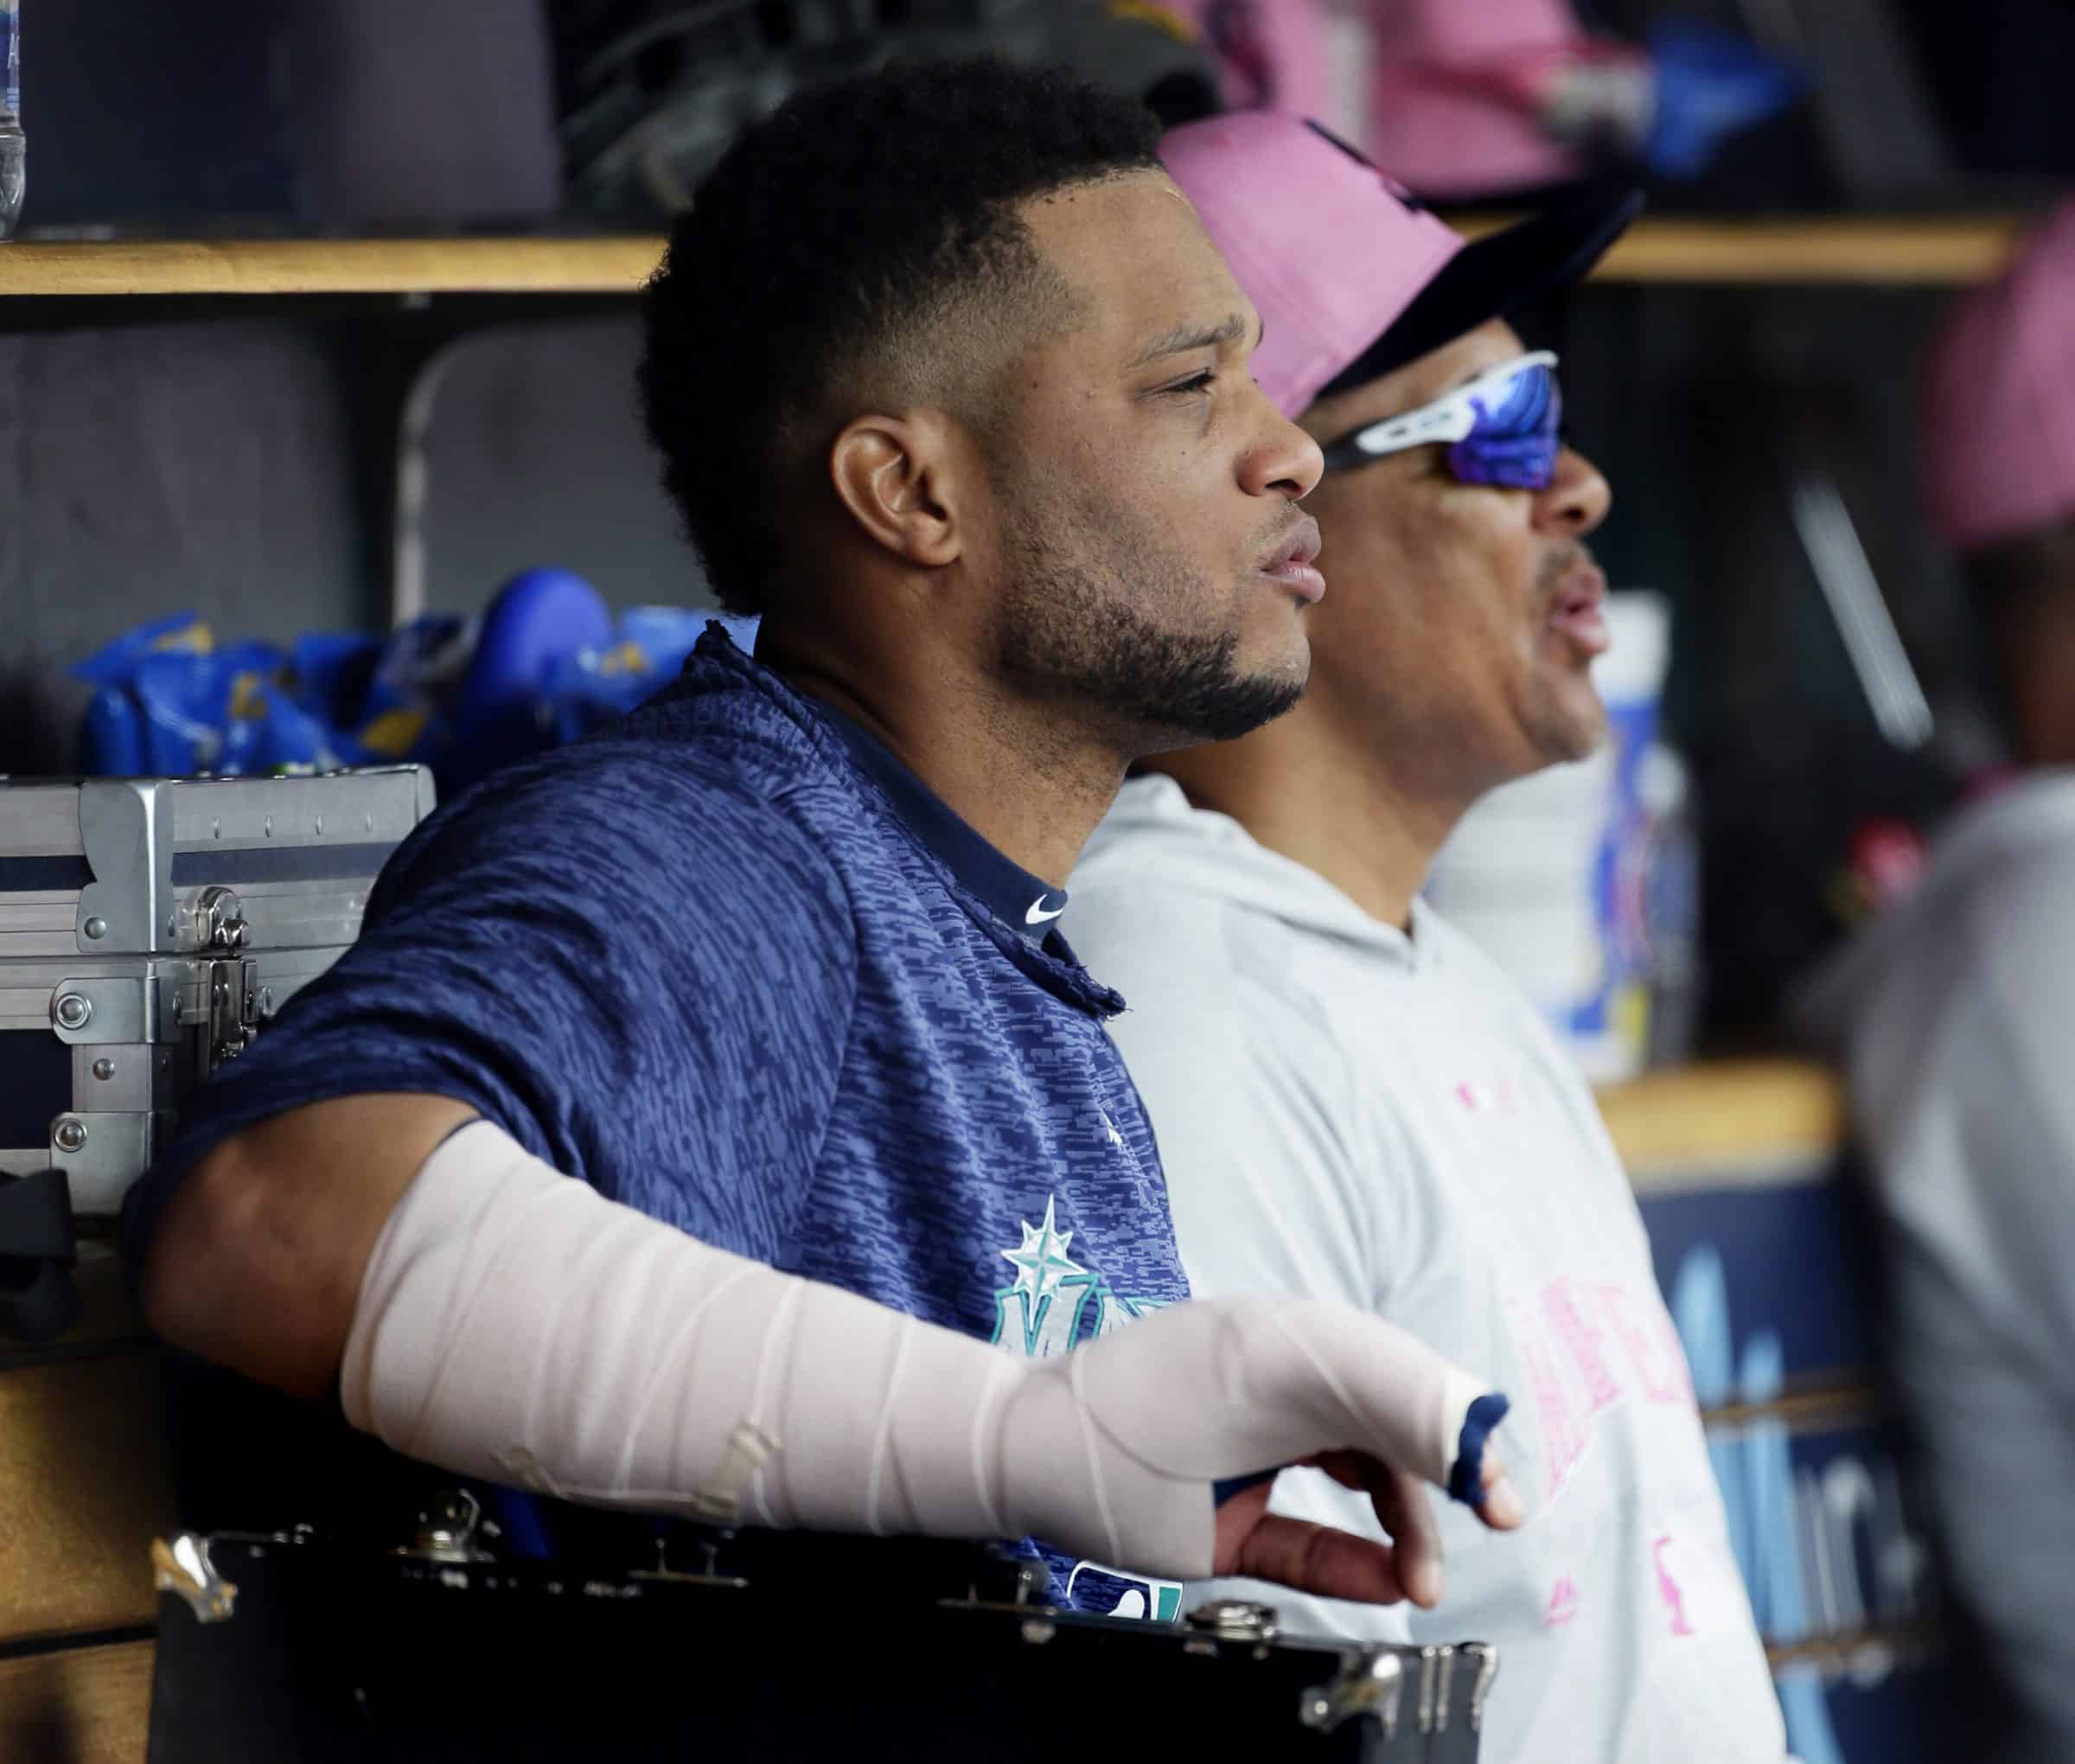 Robinson Cano, the next victim on the PED suspension list